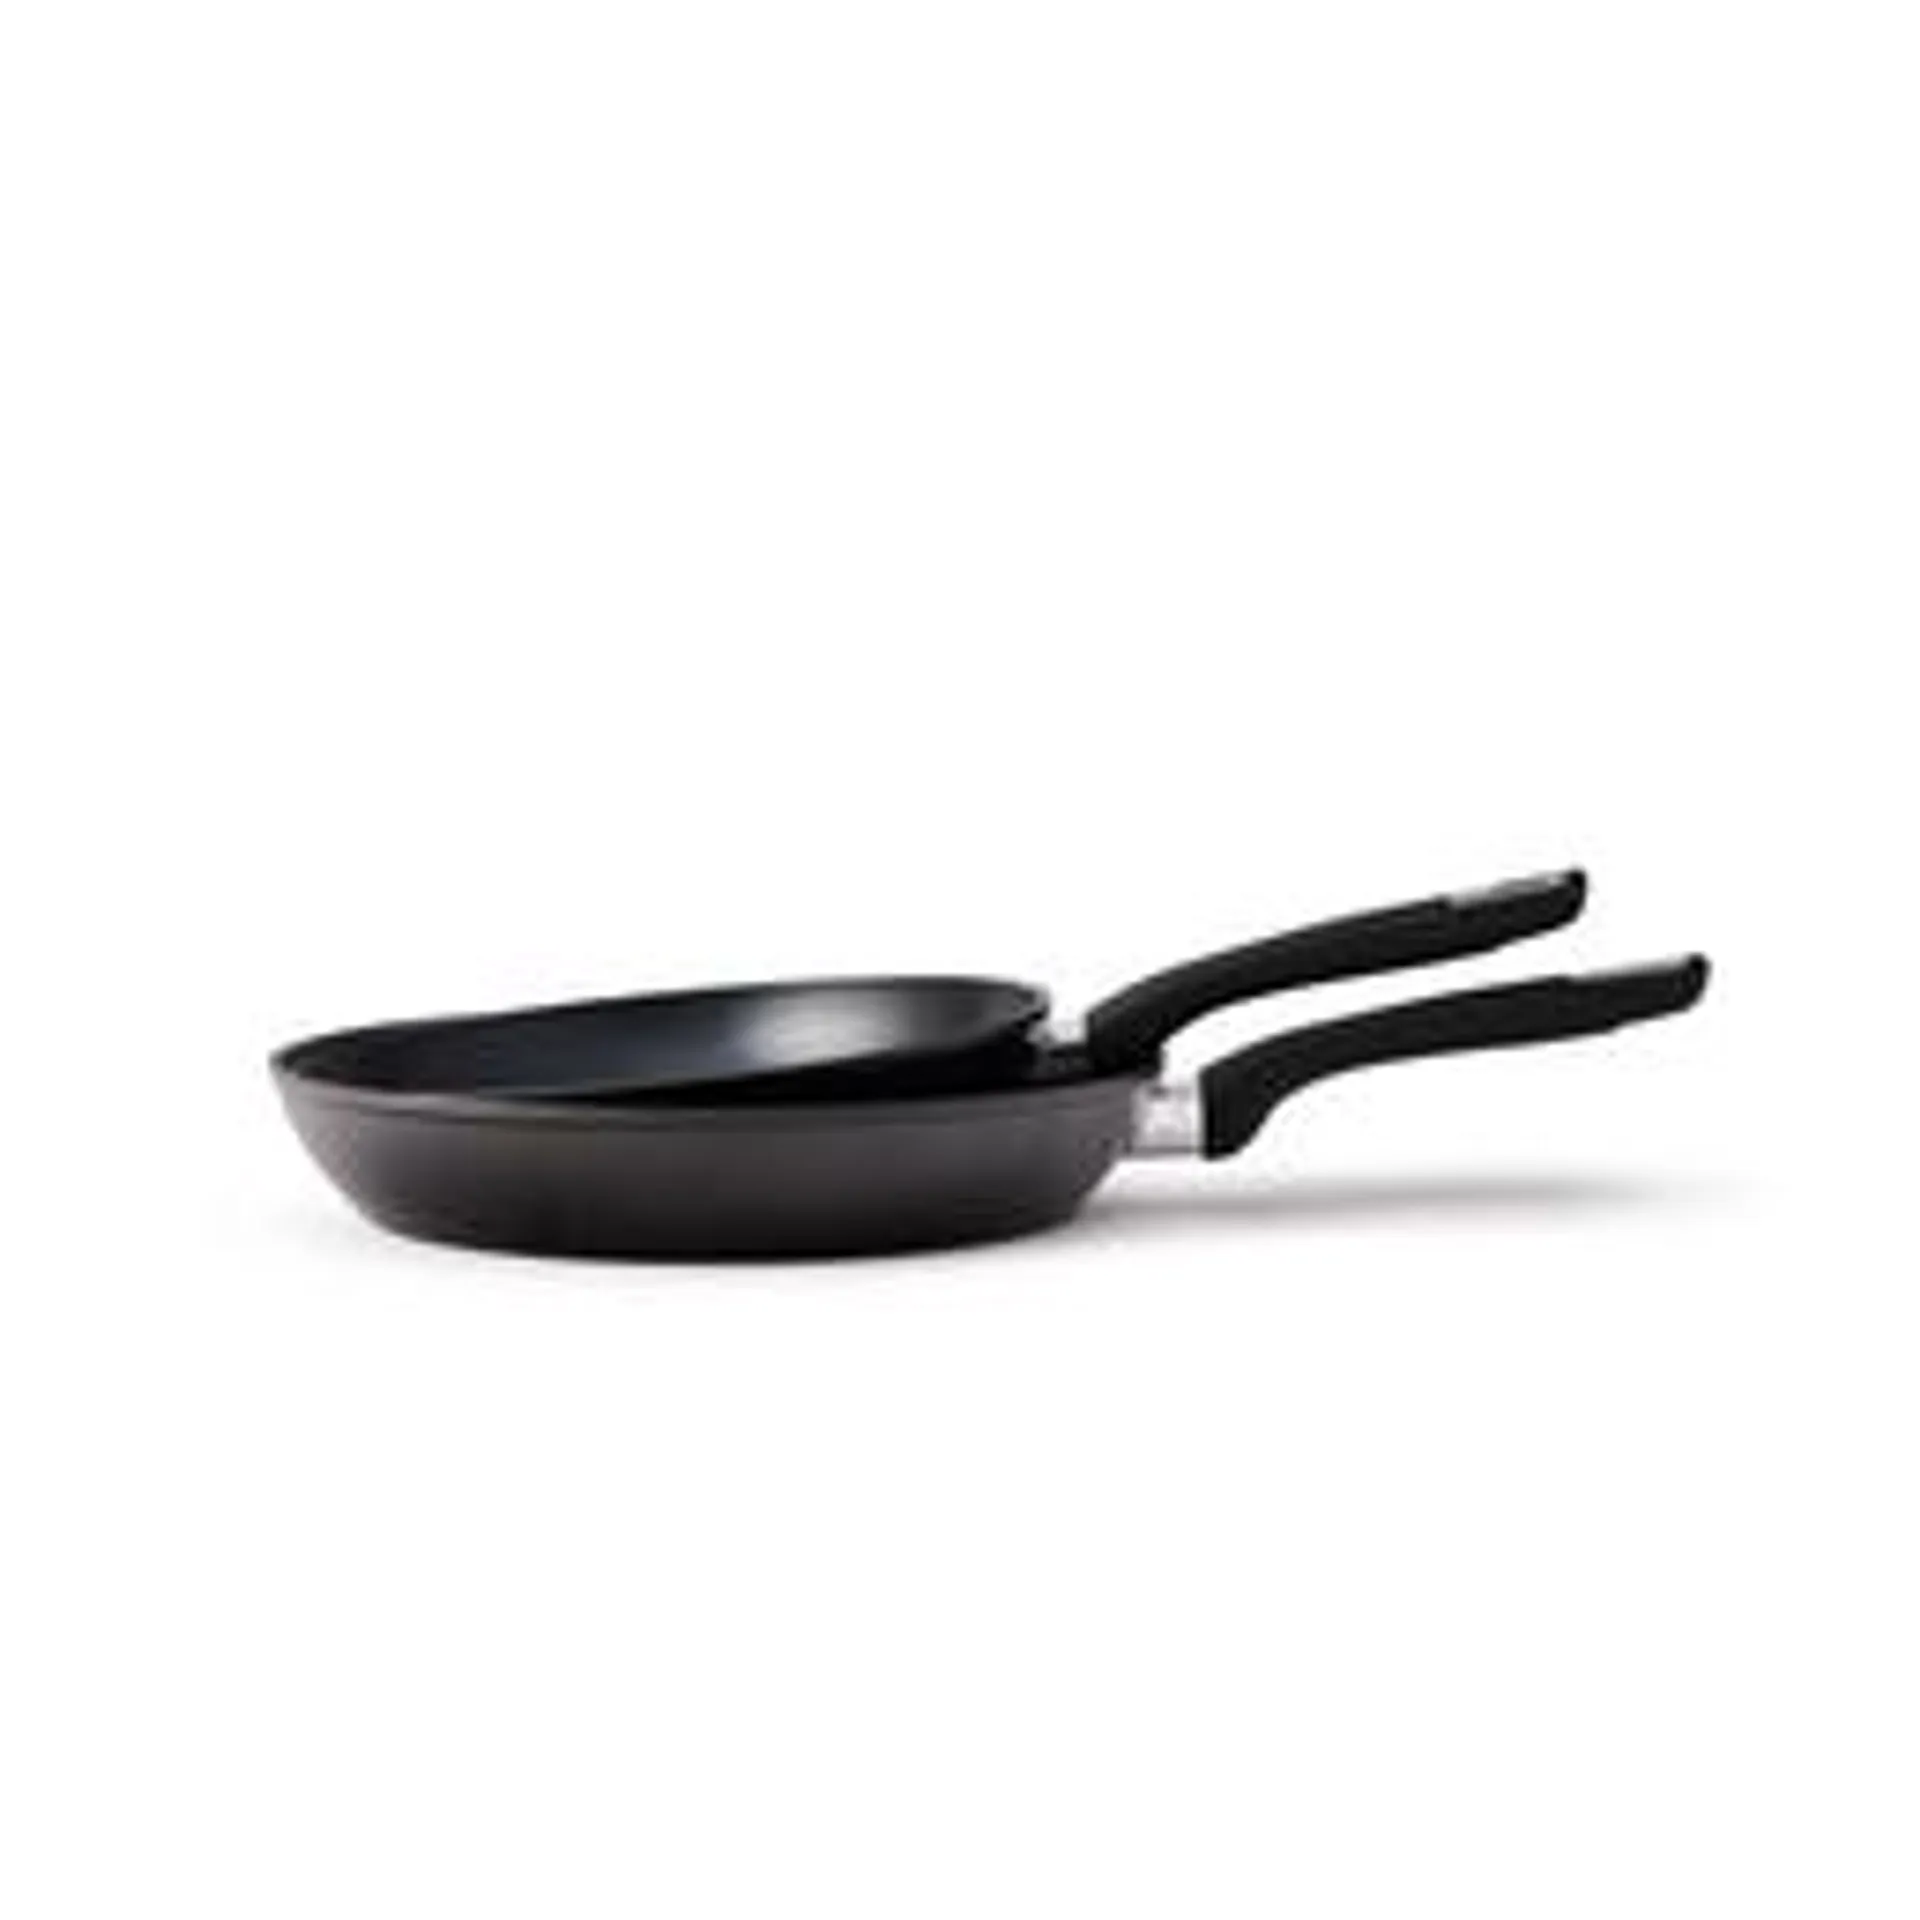 Capital Kitchen Forge Non-Stick Fry Pan Twin Pack, 24 &28cm